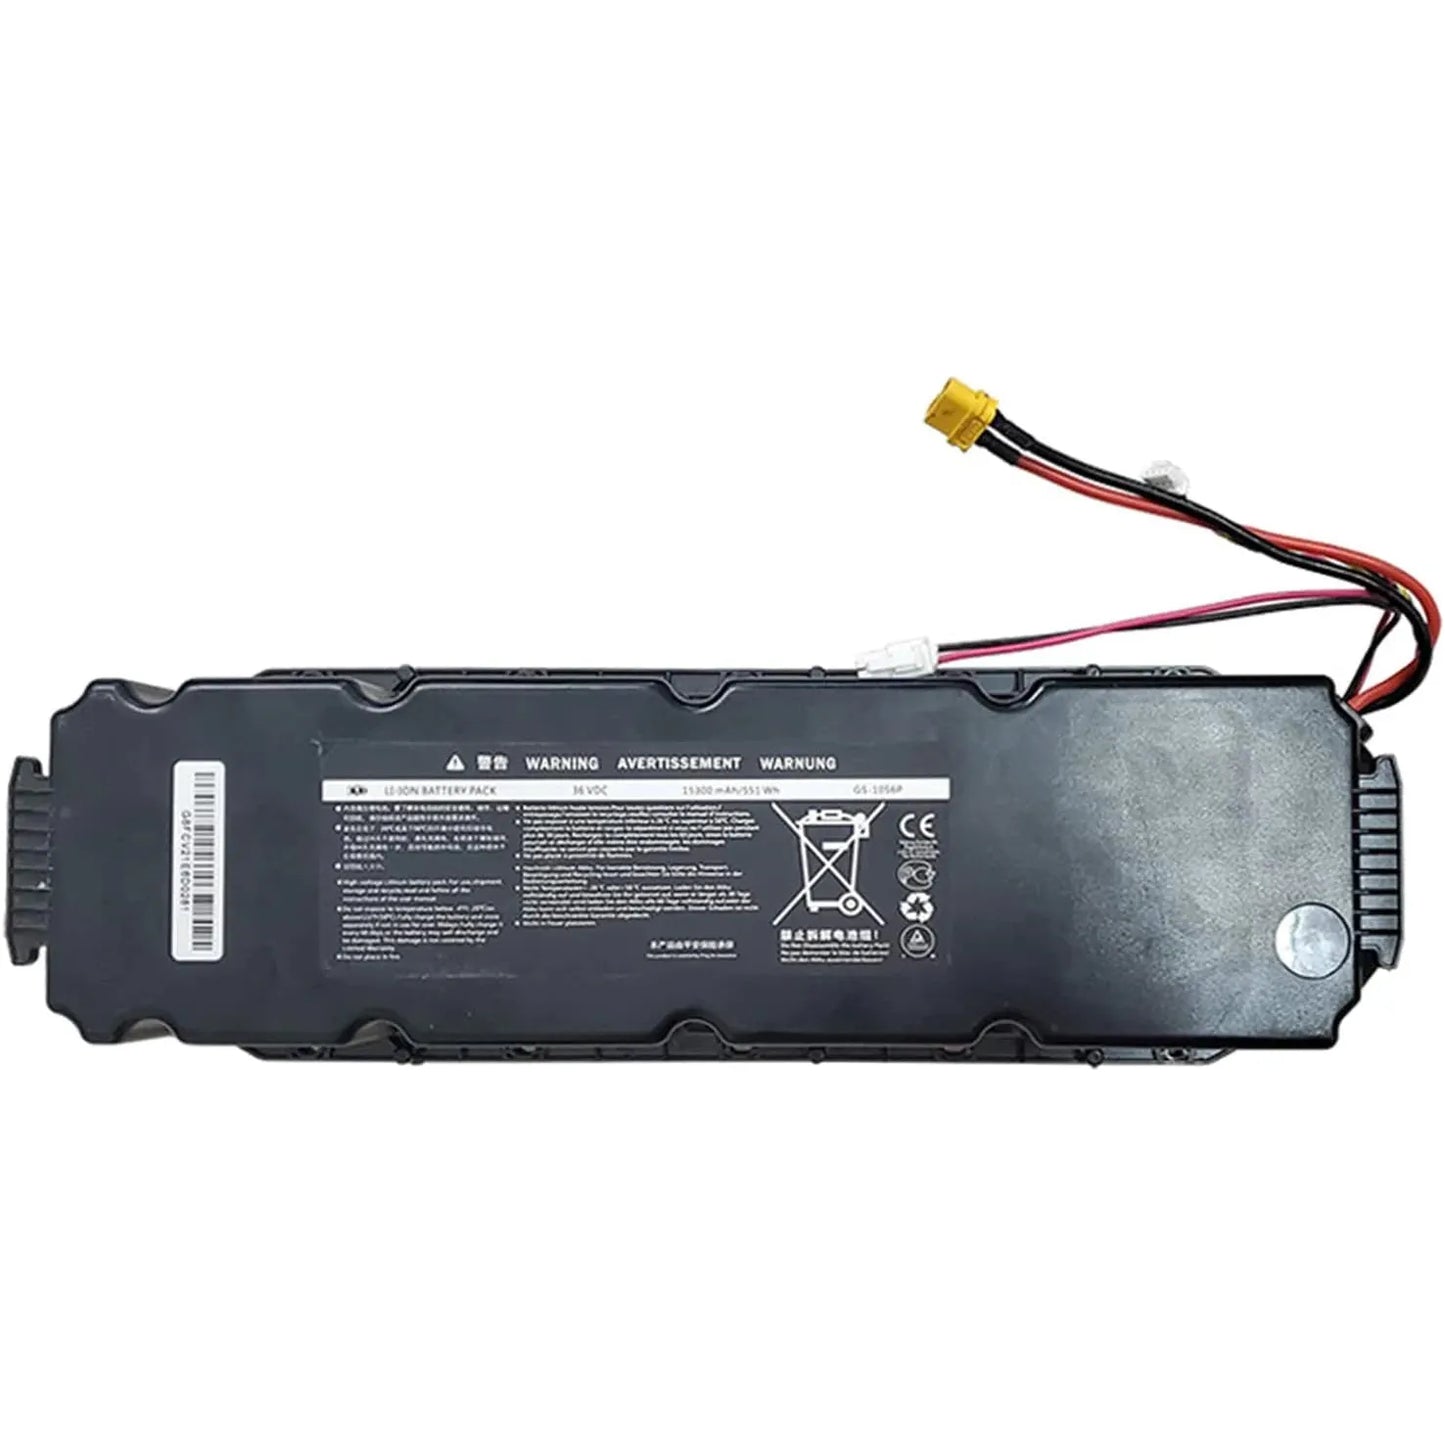 Segway Ninebot Max G30 Replacement Battery